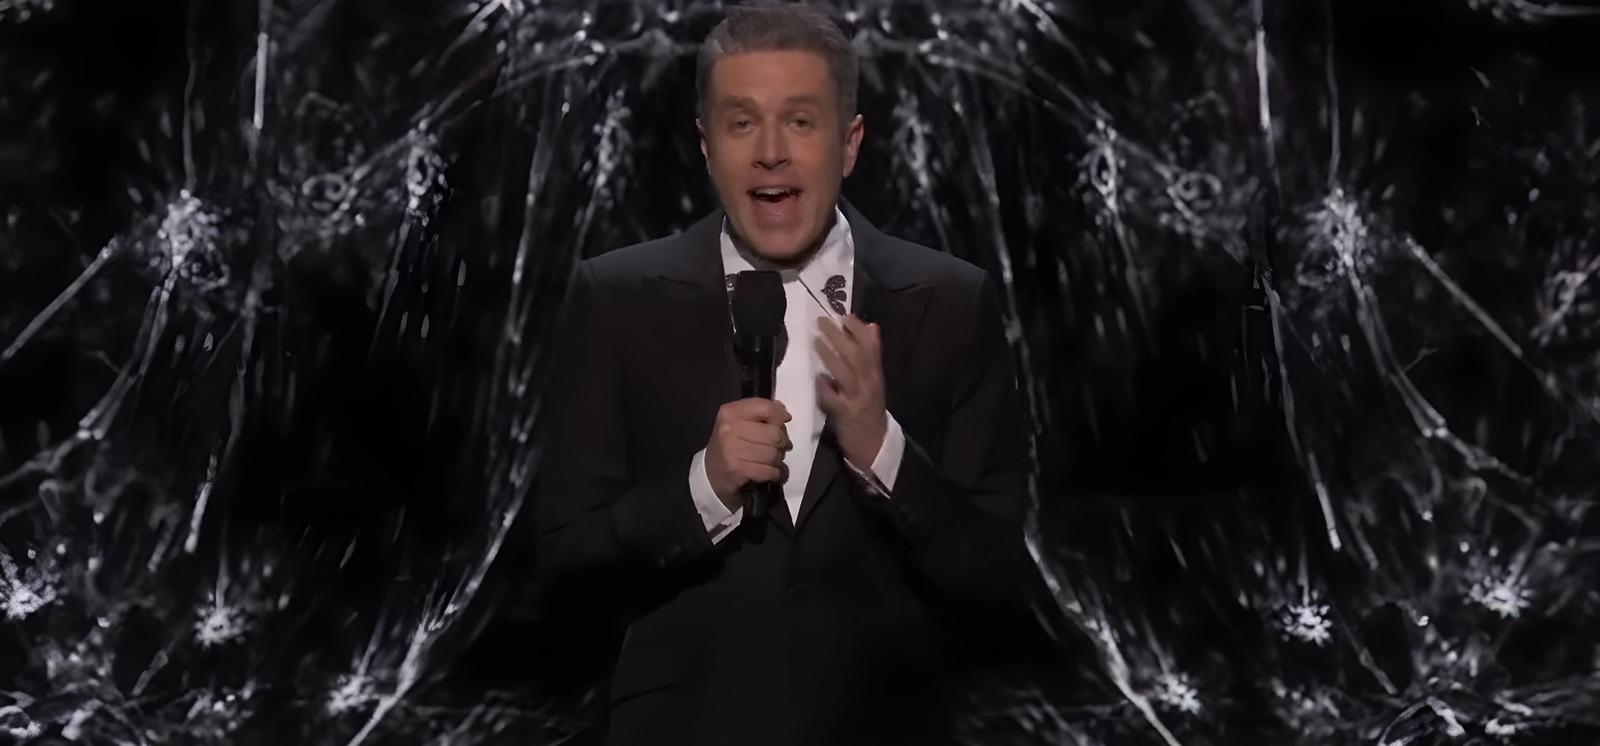 An image of Geoff Keighley.